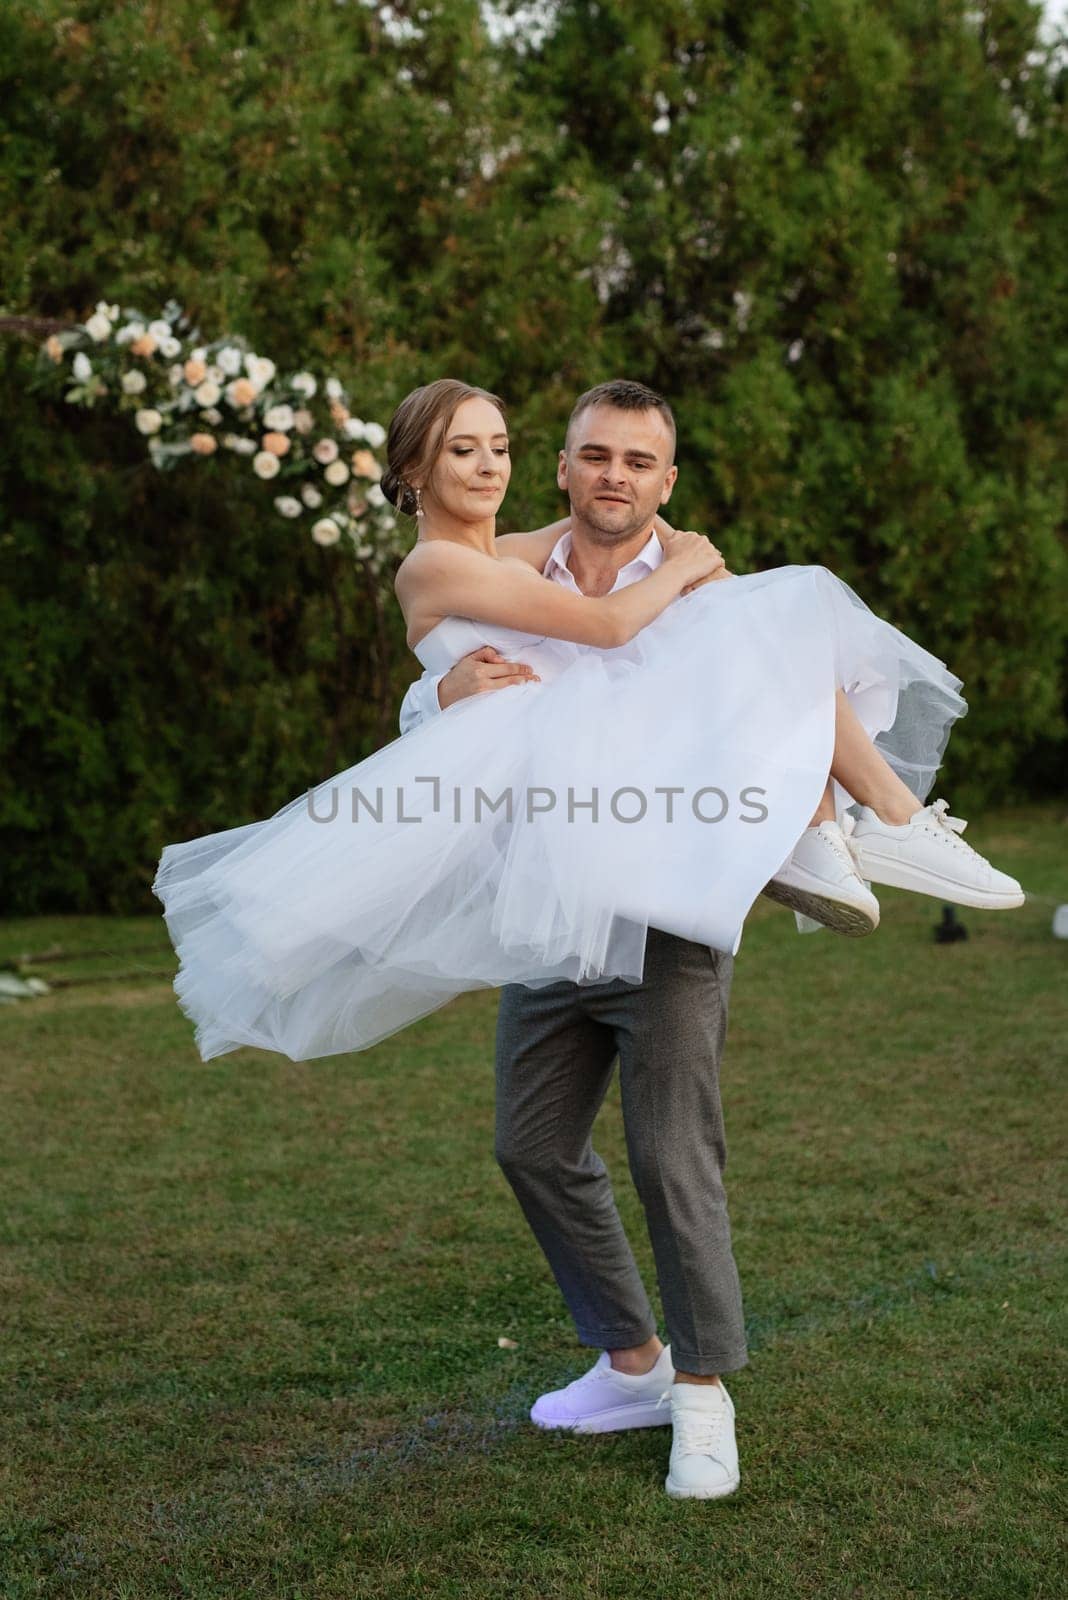 the first dance of the groom and bride in a short wedding dress on a green meadow by Andreua